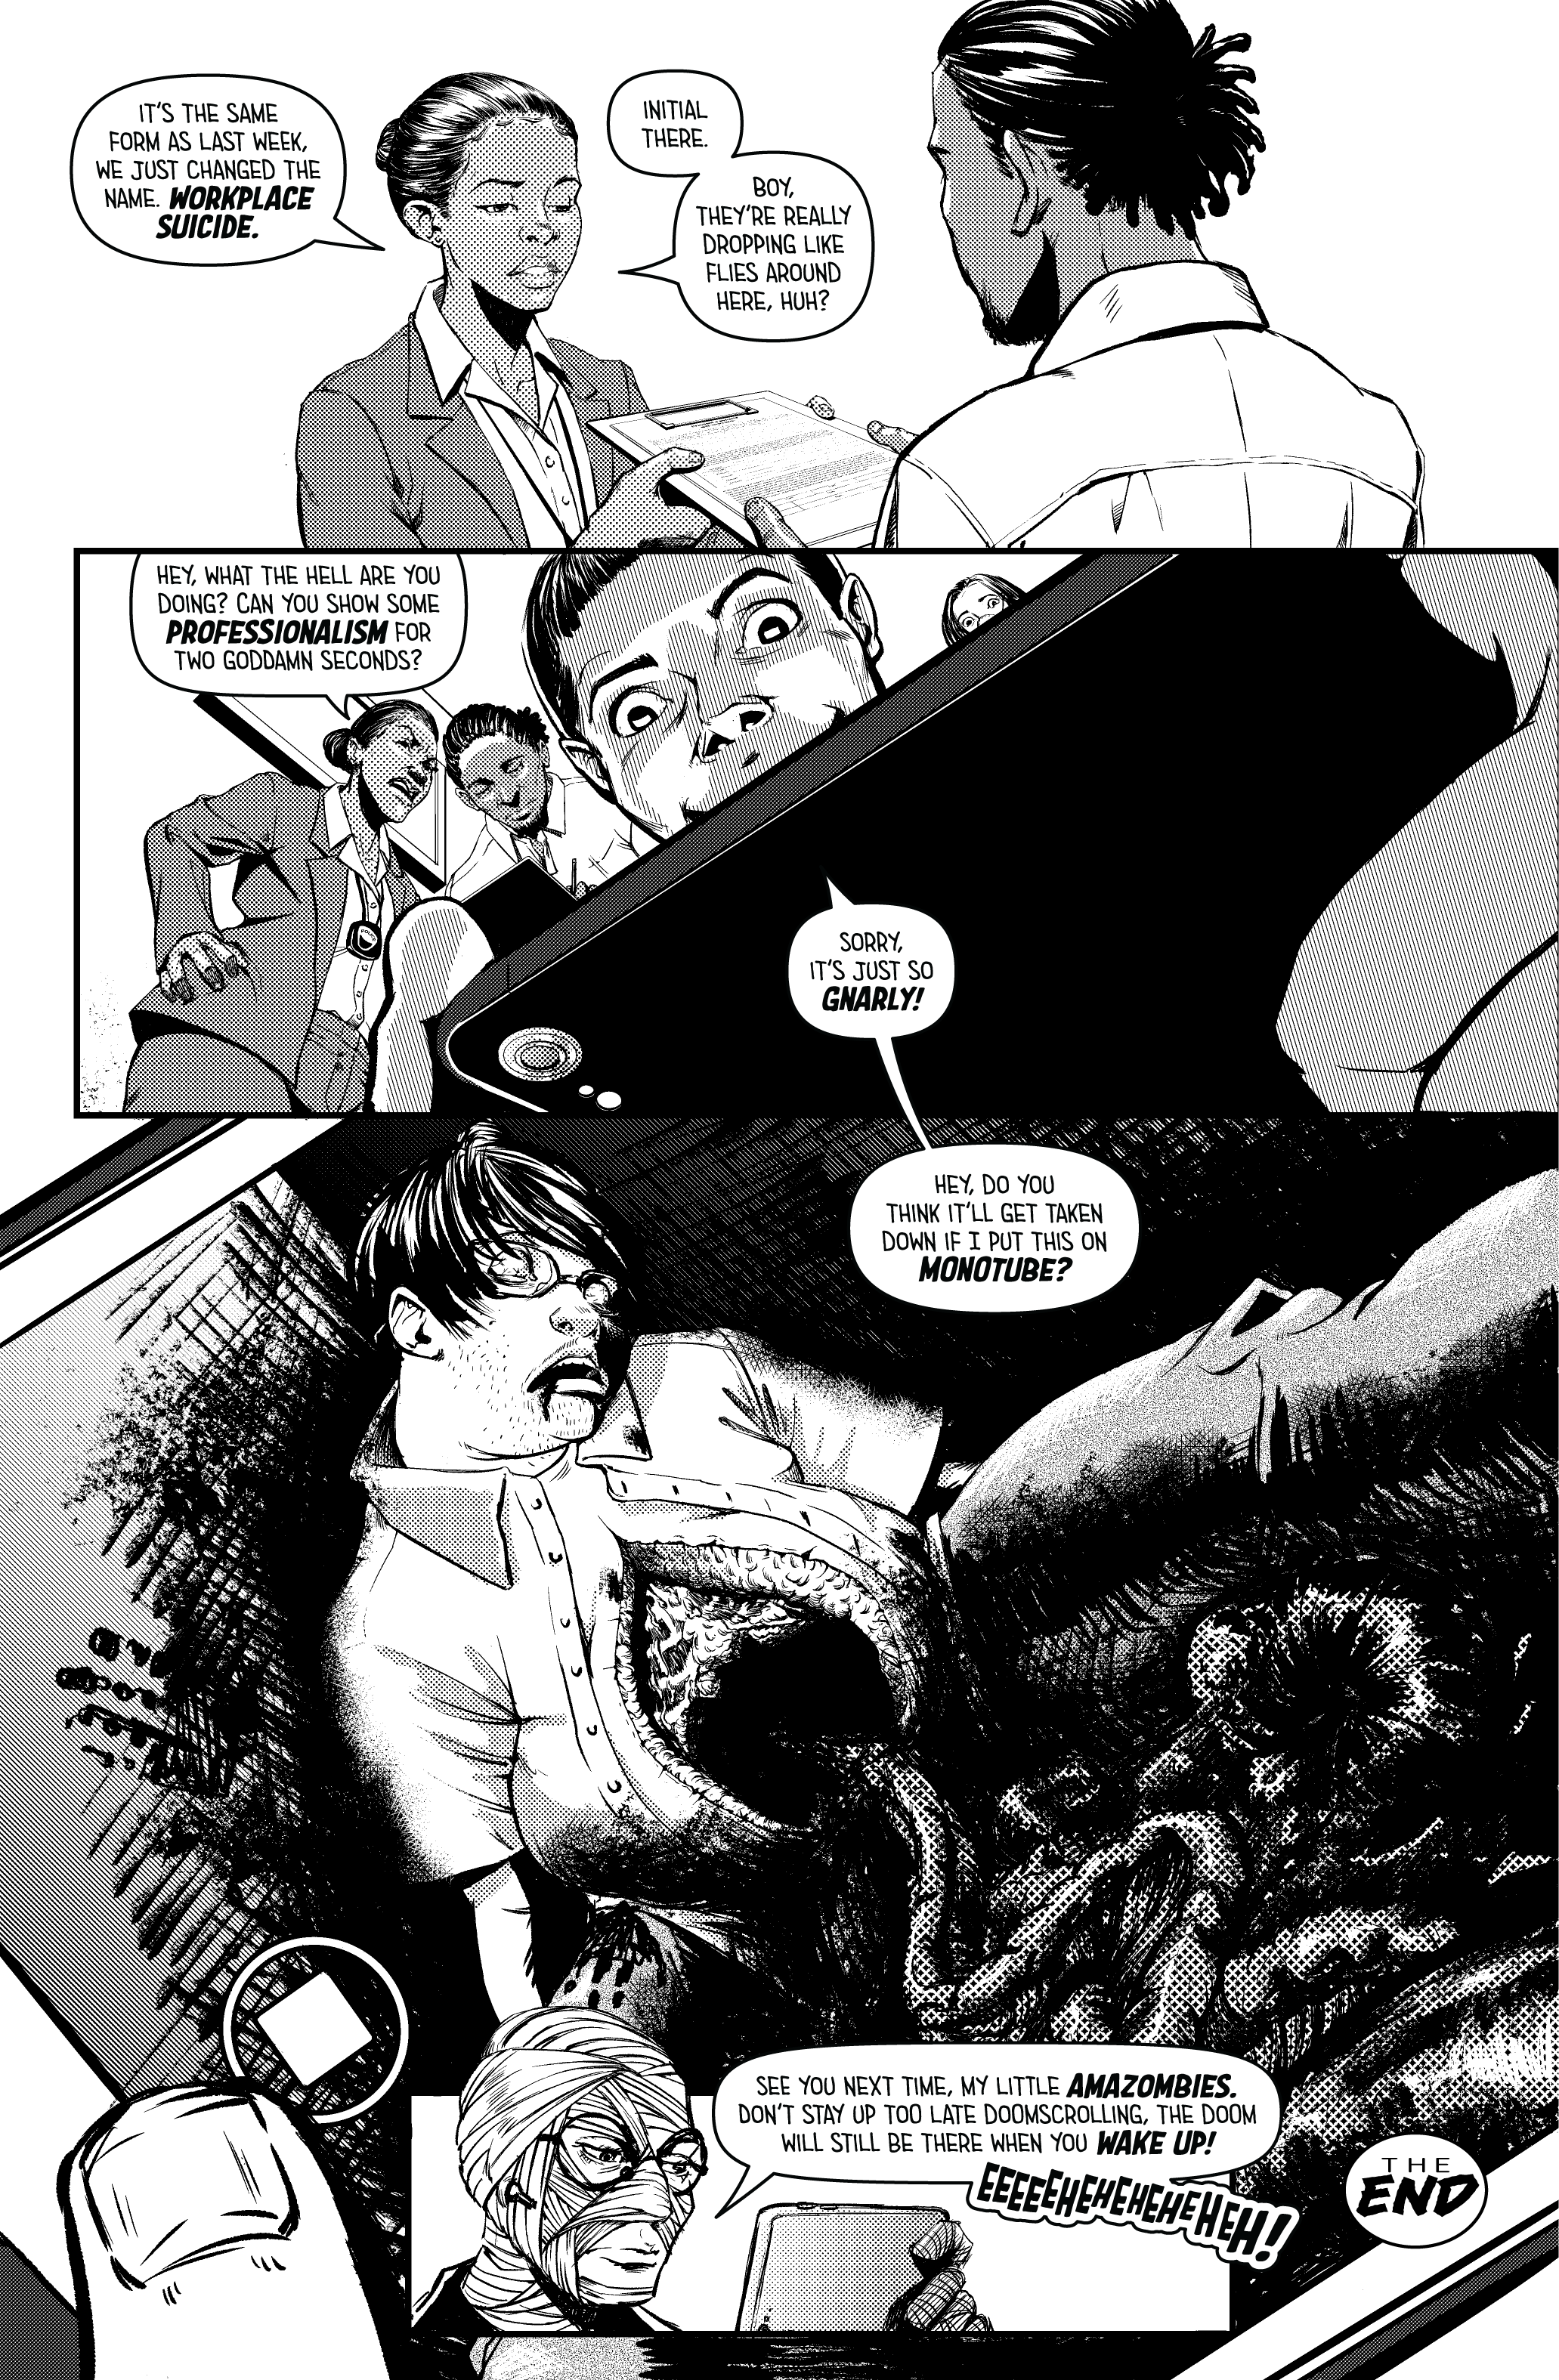 Monocul issue 05 story 03 pg 08 - Content Warning-01.png